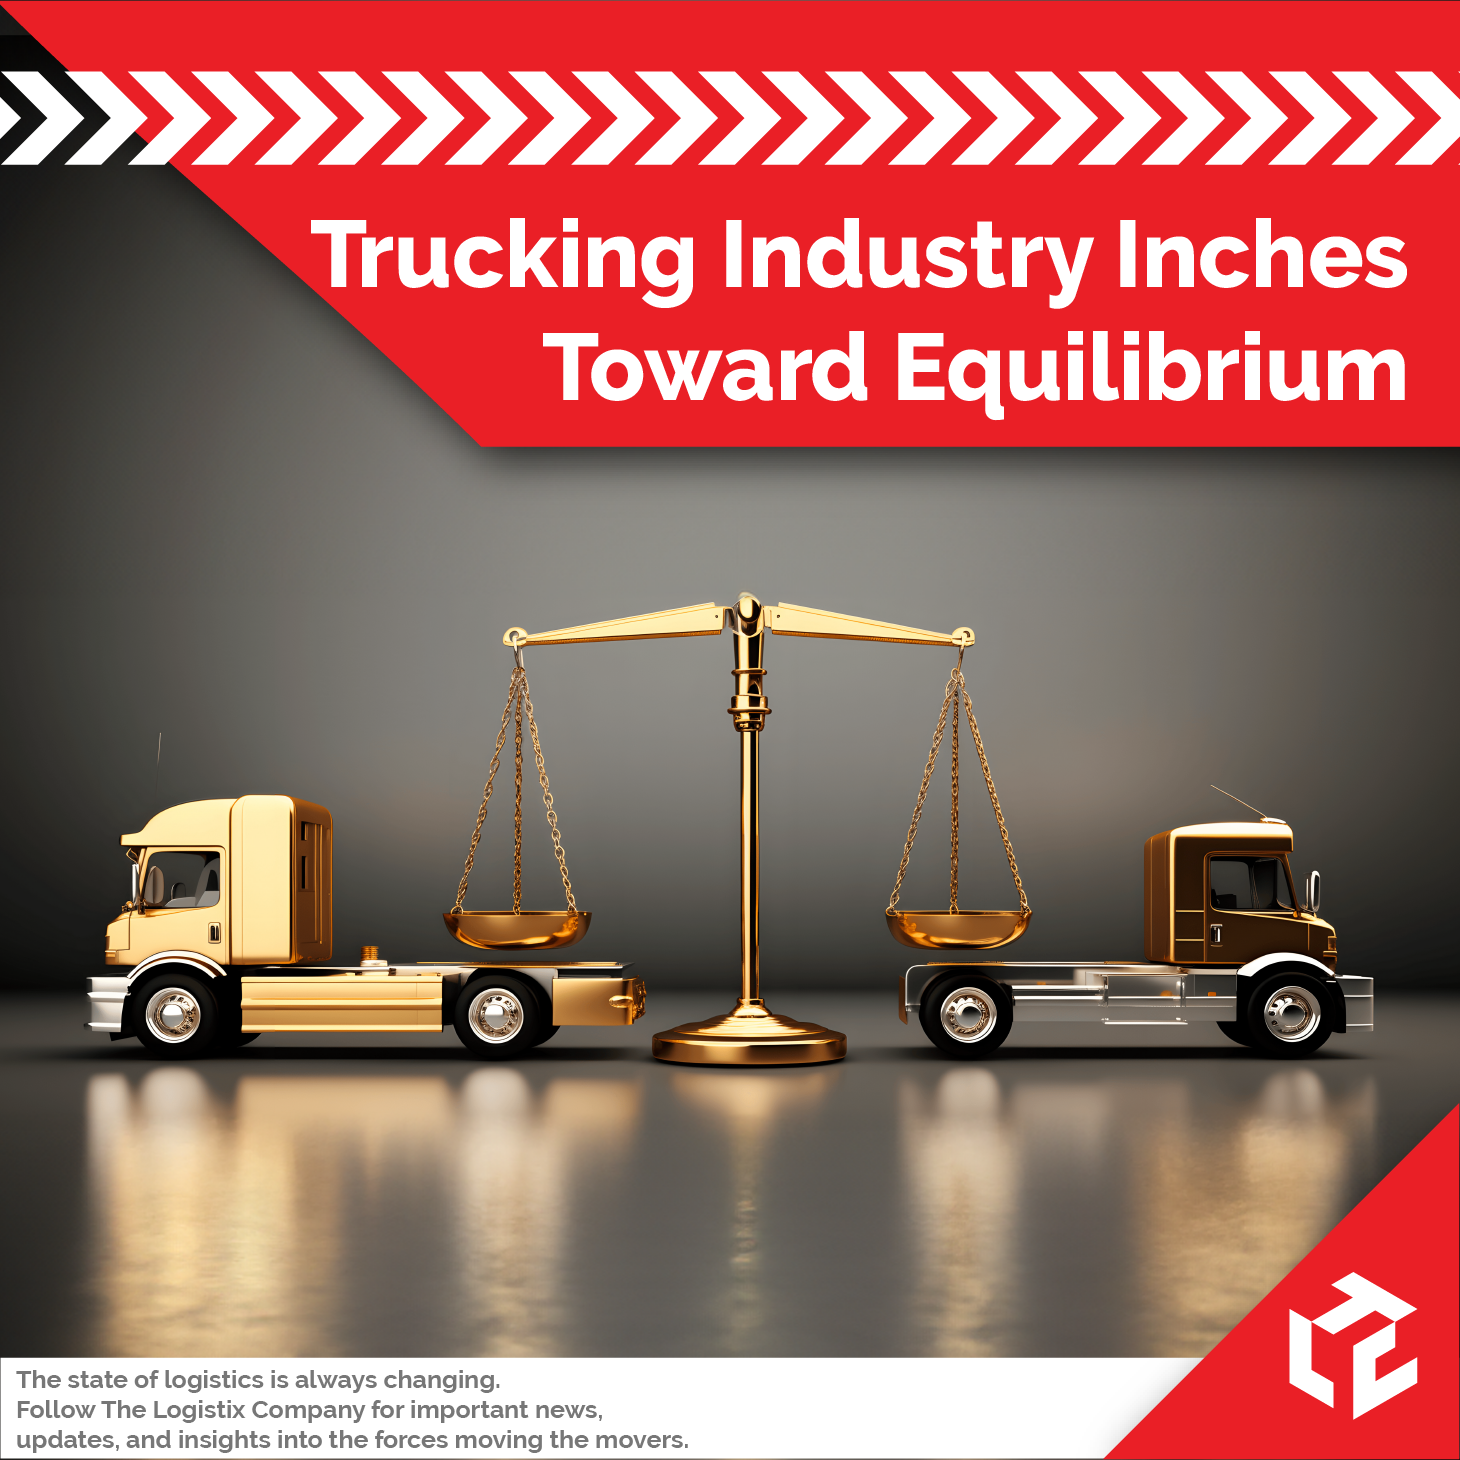 read "trucking-balance" article at thelogistixco.com